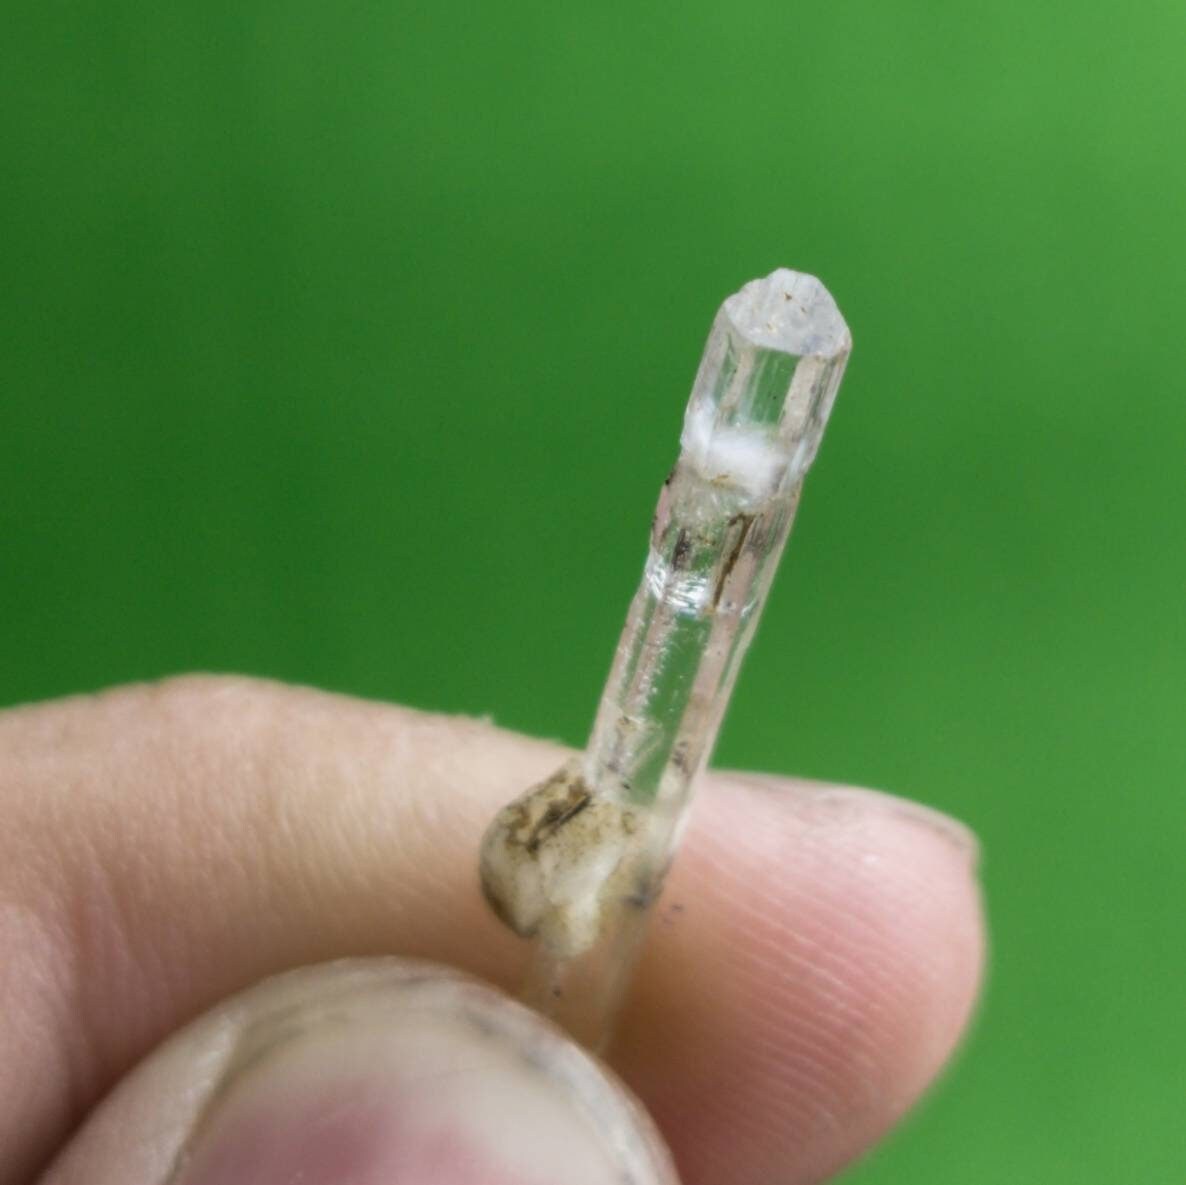 ARSAA GEMS AND MINERALSSingle terminated colorless clear terminated aquamarine crystal from skardu GilgitBaltistan Pakistan - Premium  from ARSAA GEMS AND MINERALS - Just $10.00! Shop now at ARSAA GEMS AND MINERALS